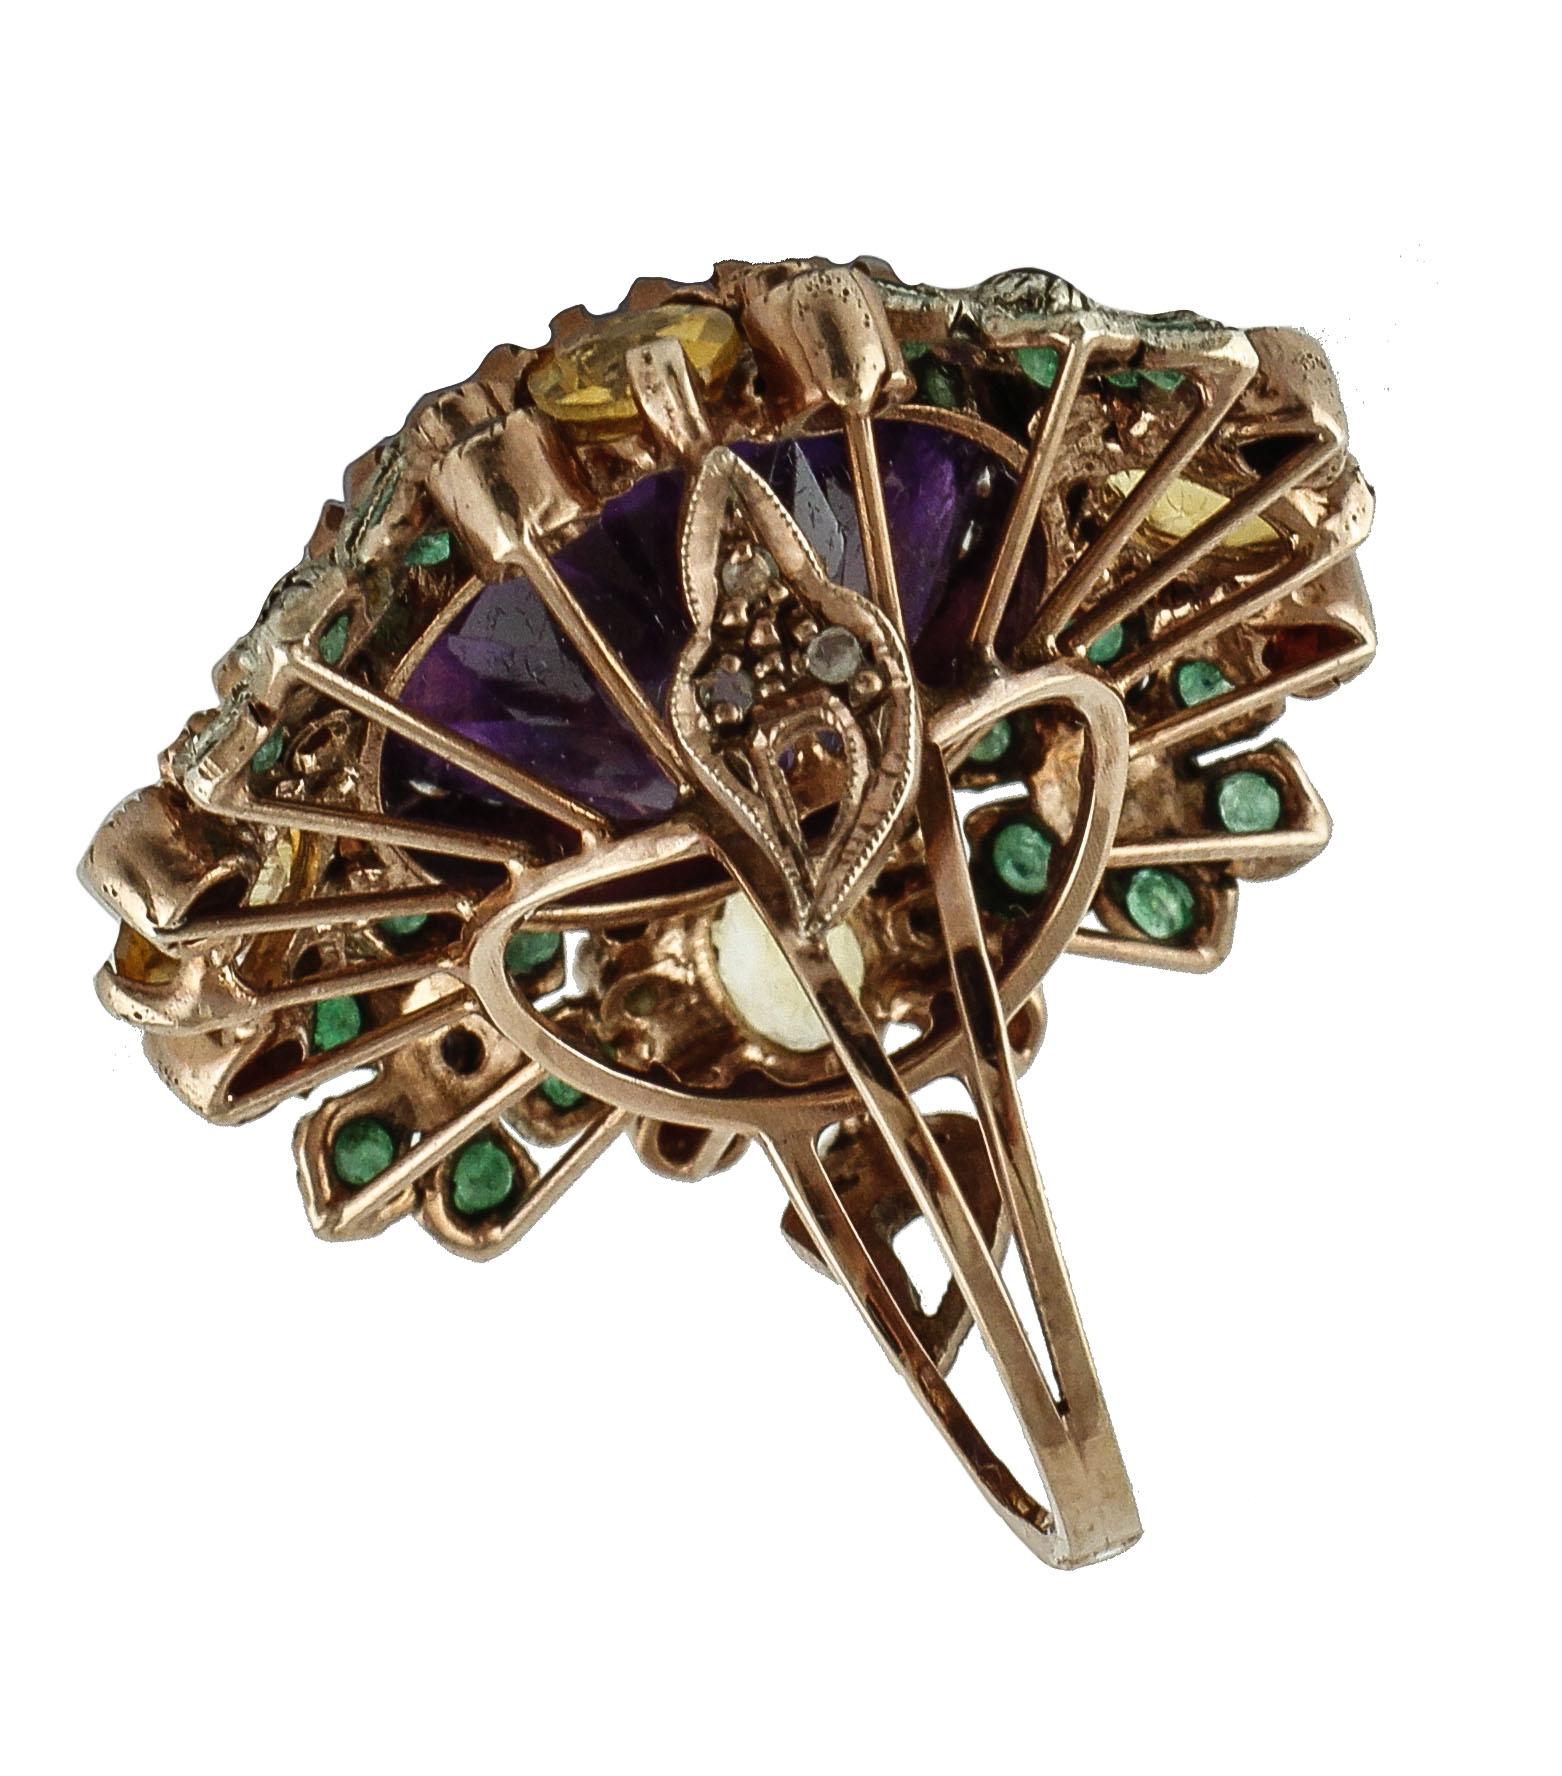 Retro Diamonds Emeralds Amethysts Topazes Garnets Rose Gold and Silver Cocktail Ring